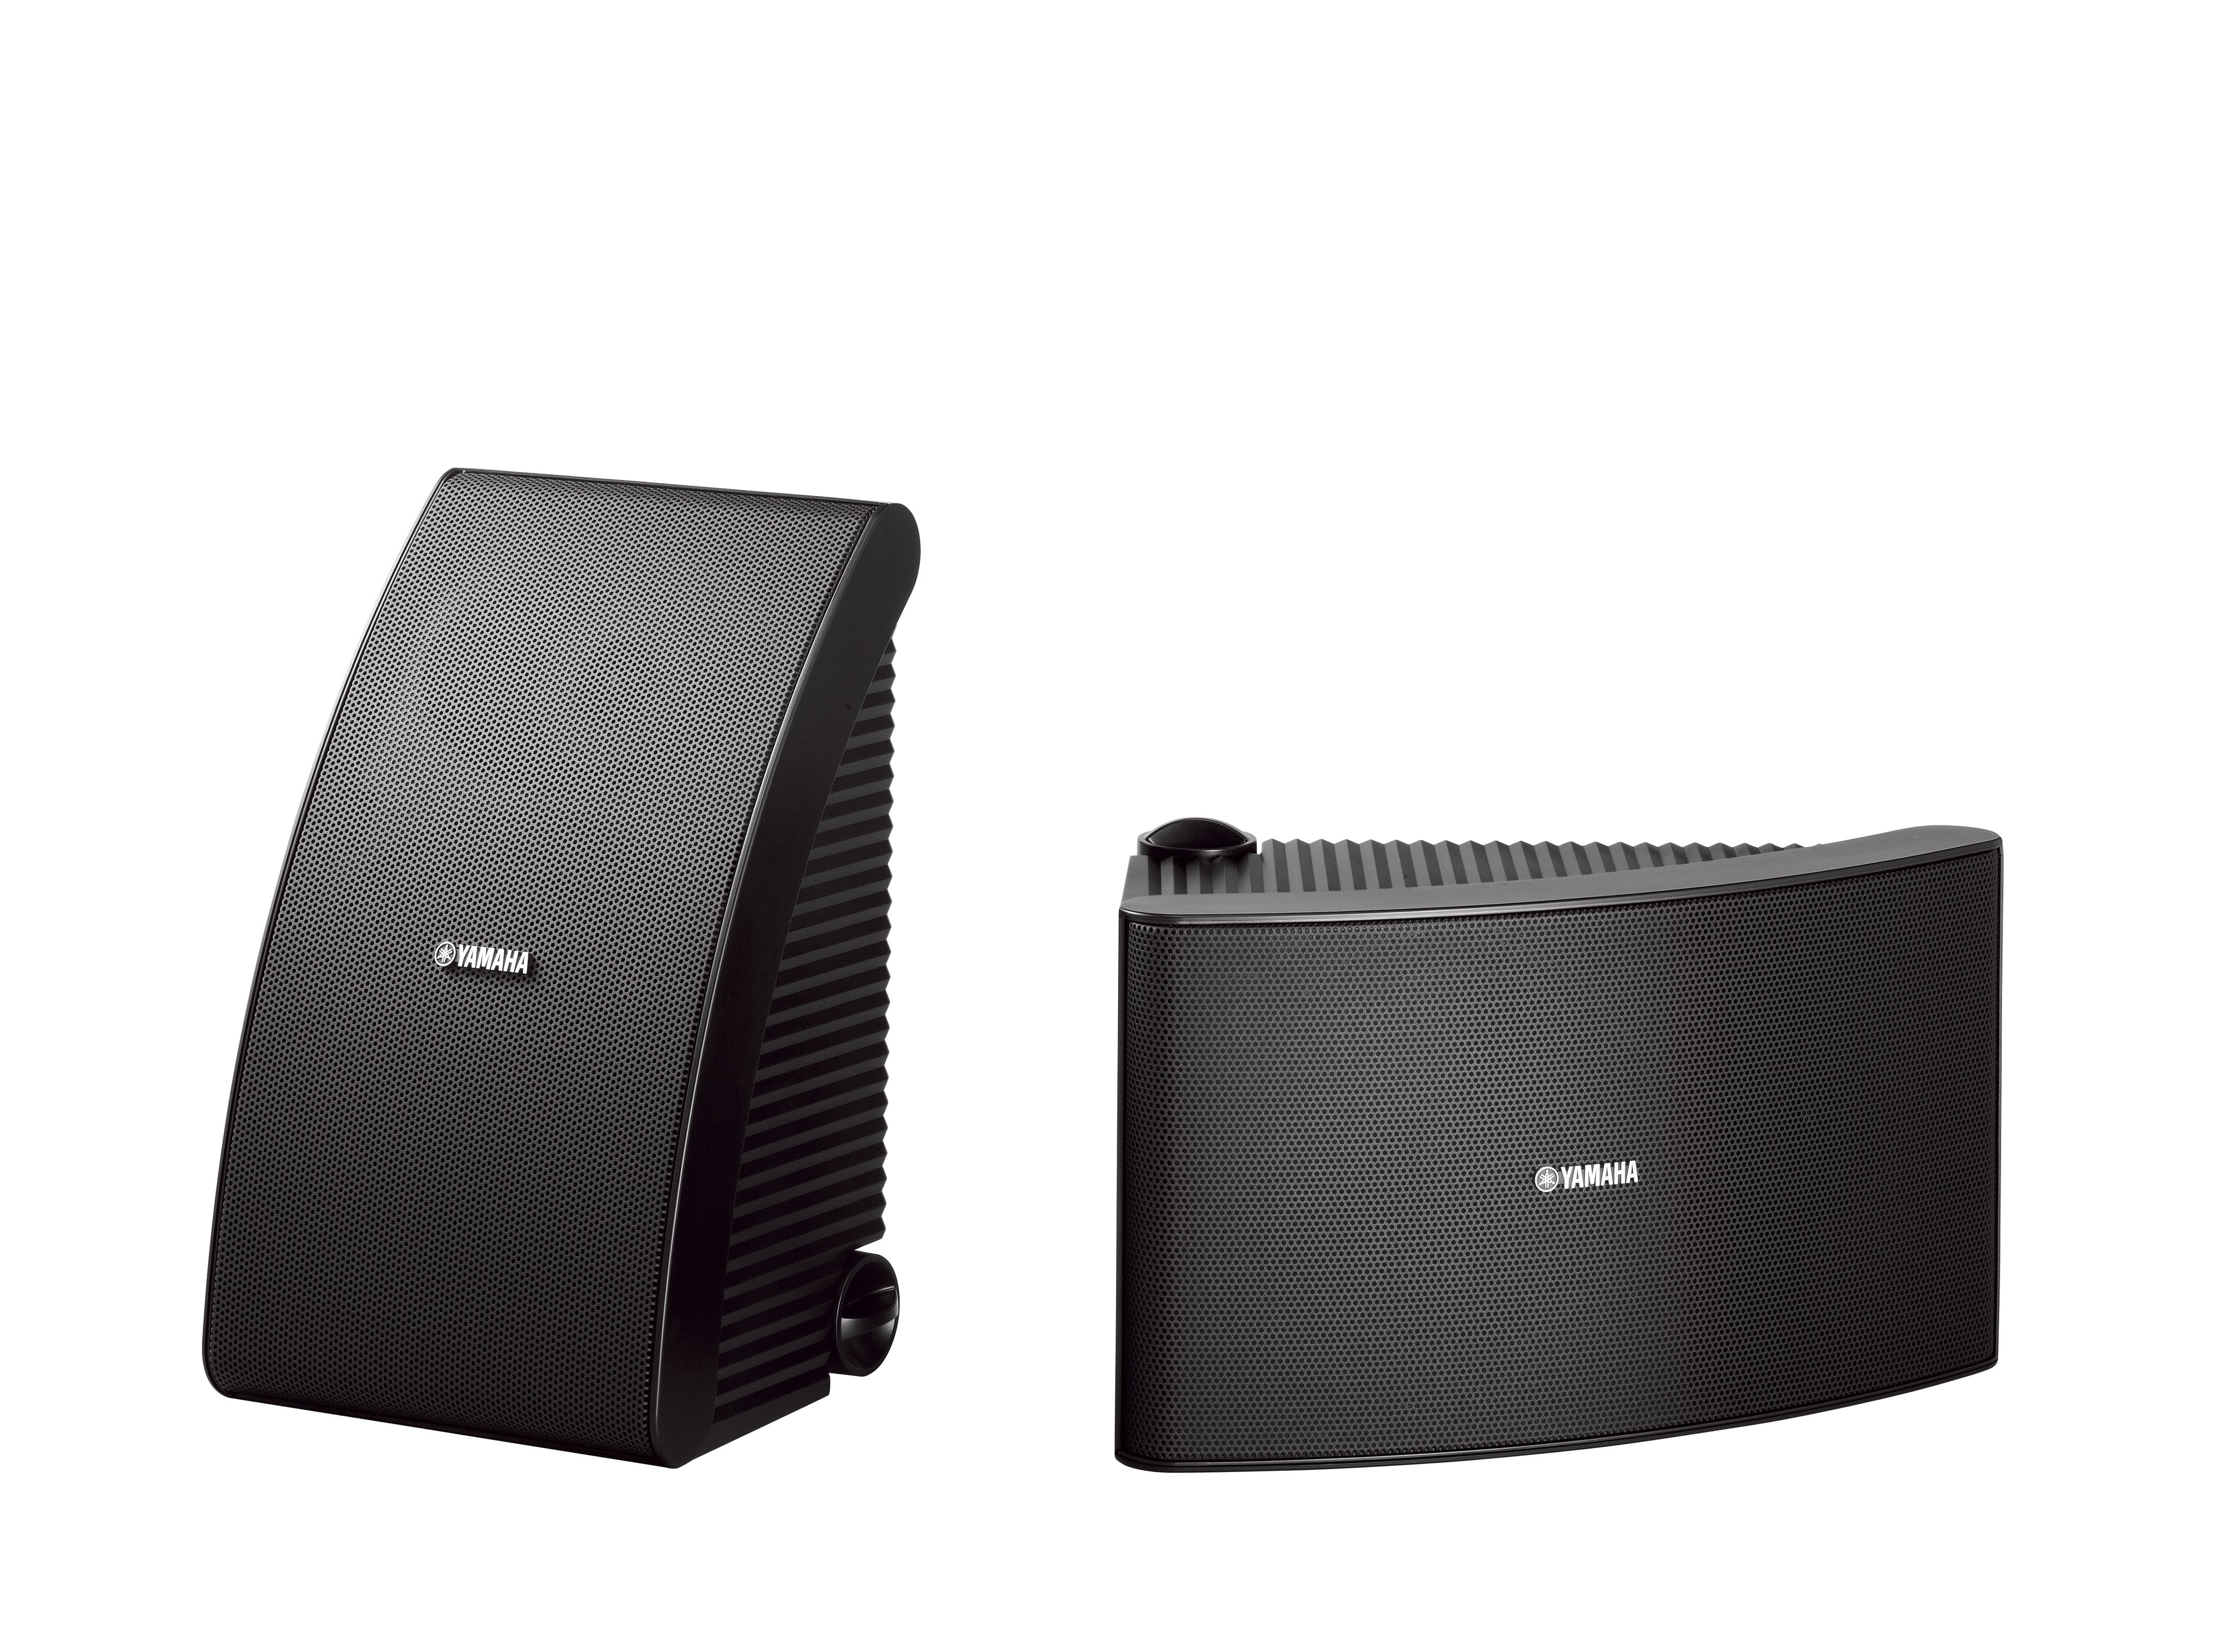 Renewed Pair, Black - Wired Yamaha NS-AW150BL 2-Way Indoor/Outdoor Speakers 